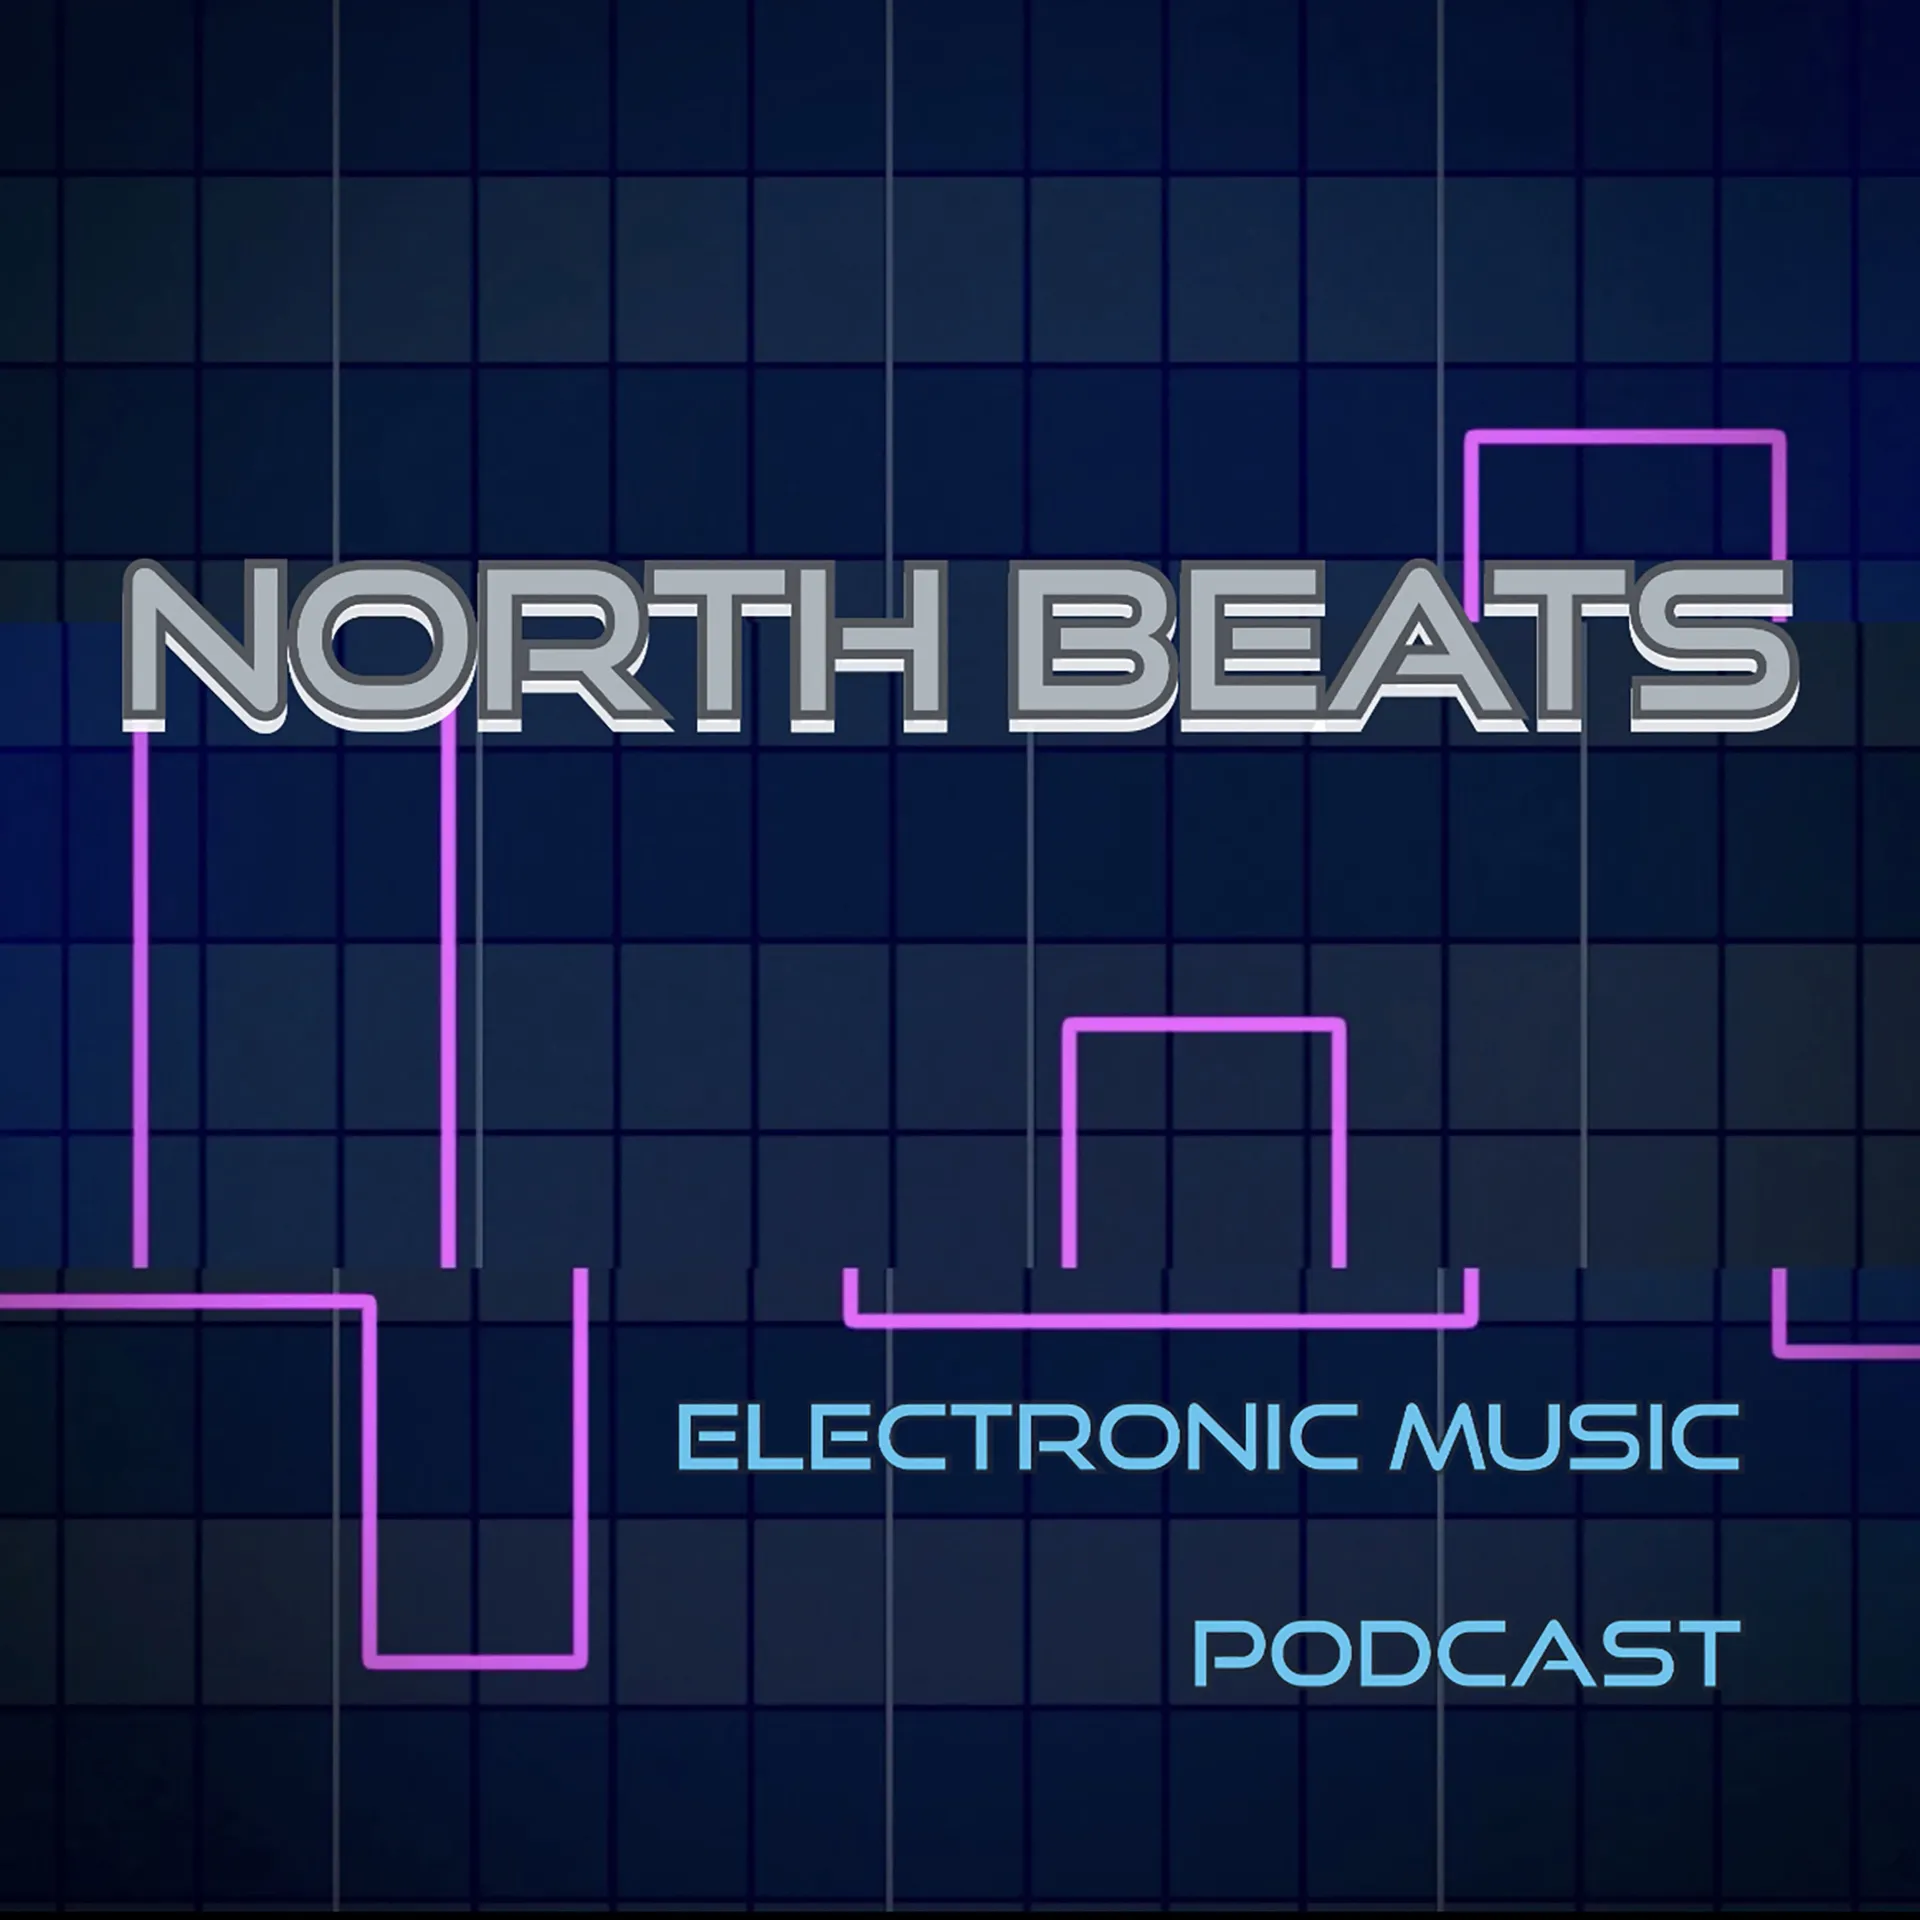 Data Lecher interview on North Beats podcast